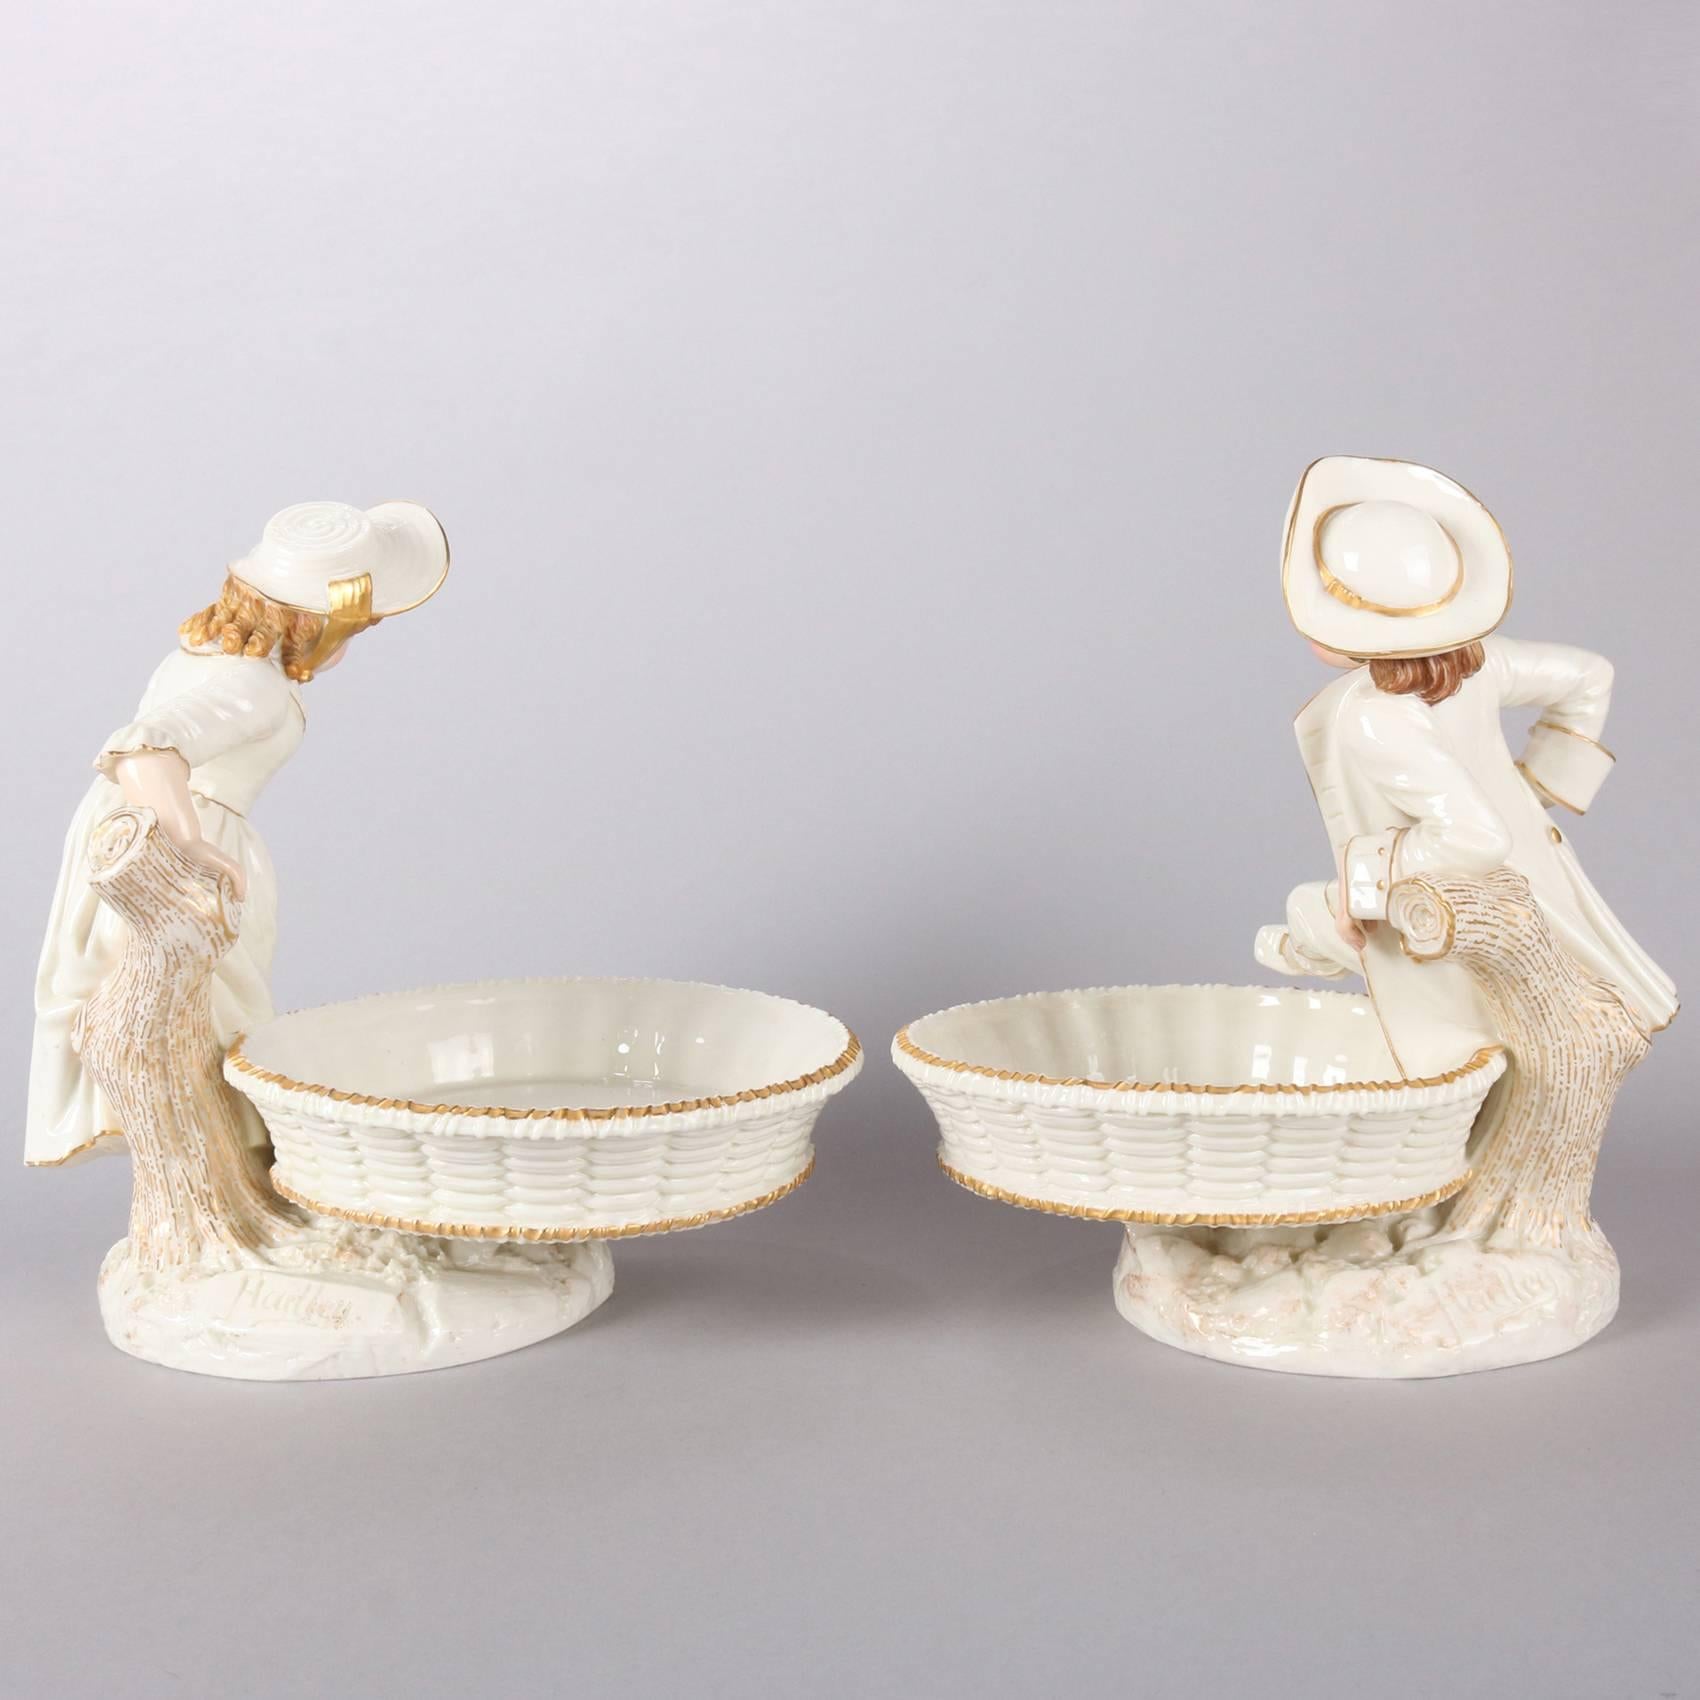 Pair of English Royal Worcester Figural Gilt Bon Bon Dishes by James Hadley 1